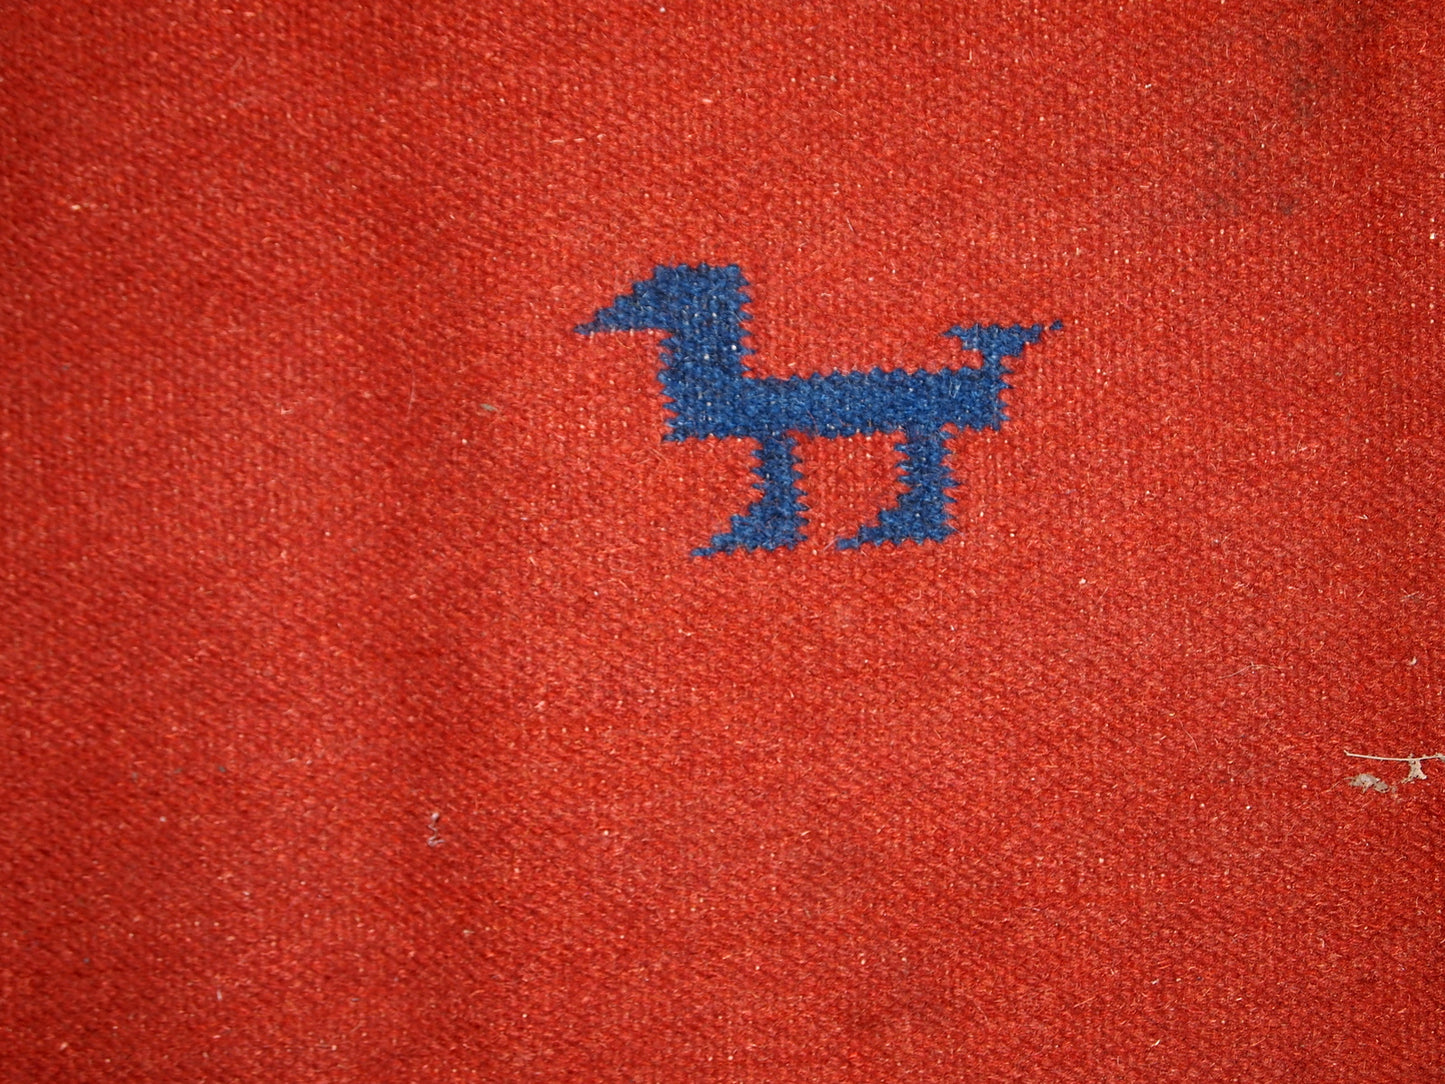 Mid-century Persian kilim in red shade and all-over design. Miniature animals are in navy blue shade along with border. Sky blue colors are in each corner. The kilim is generally in original good condition, one corner is missing.